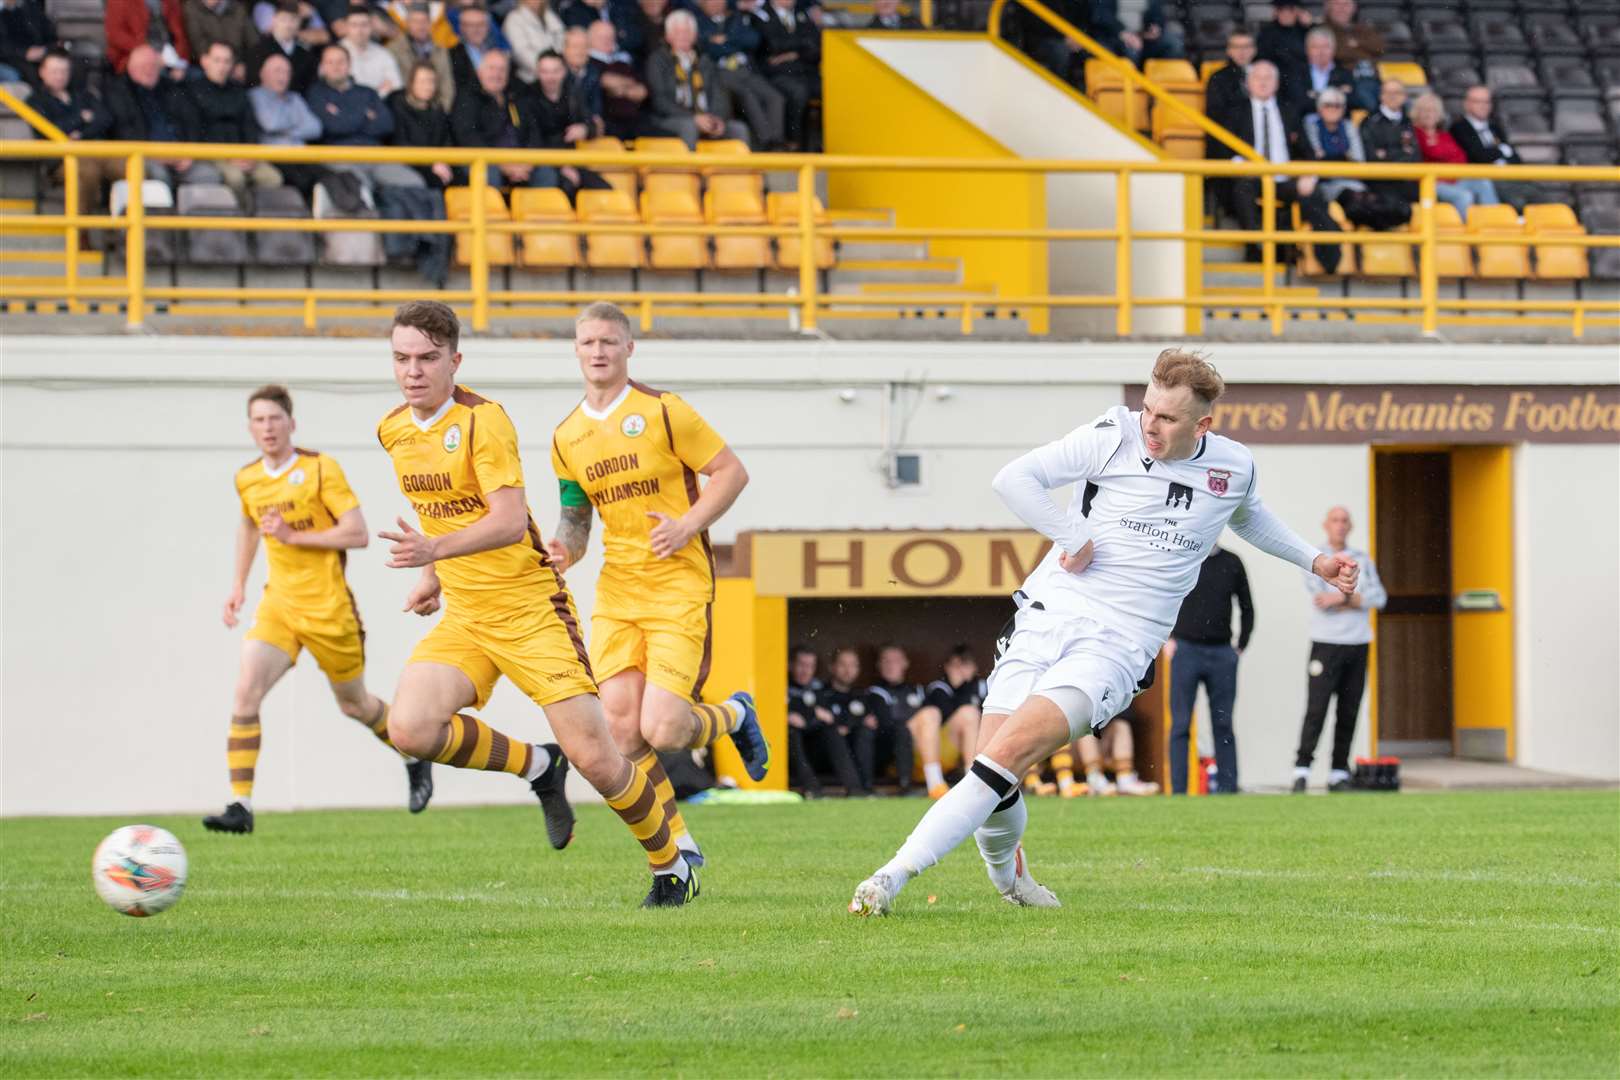 Rothes midfielder Fraser Robertson scores the second goal for the visiting Speysiders. Picture: Daniel Forsyth